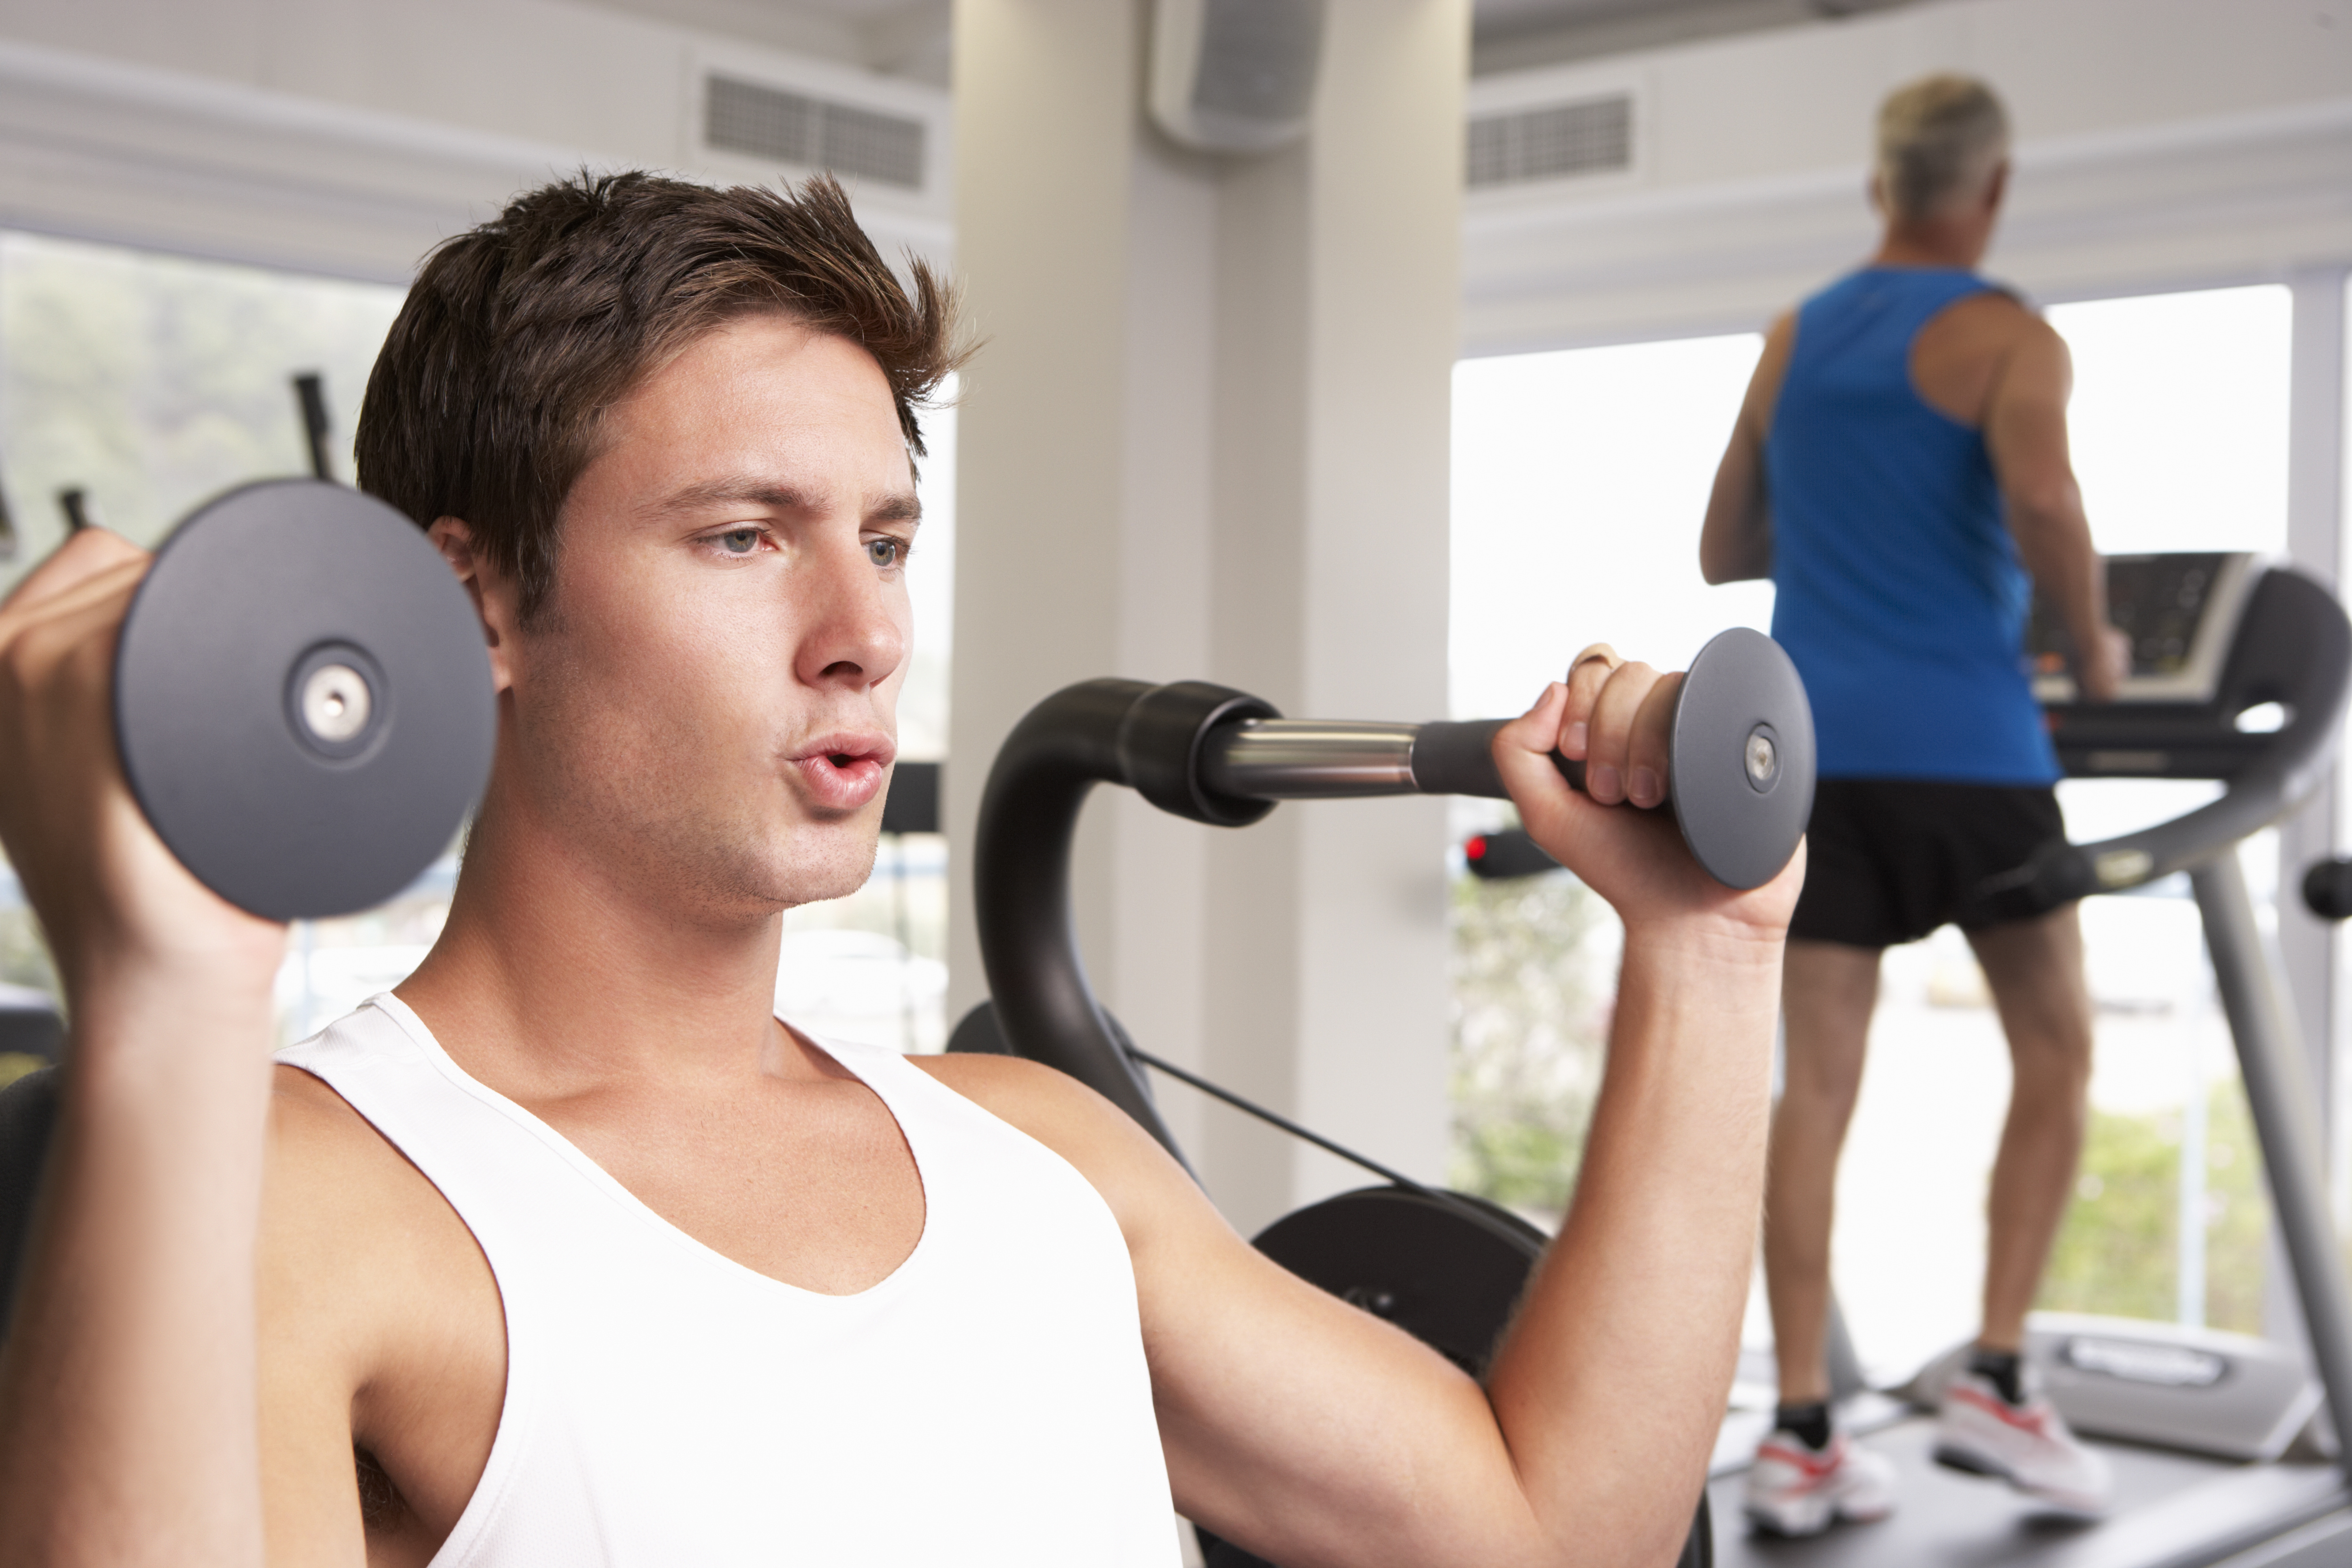 Man Using Weights Machine With Runner On Treadmill In Background